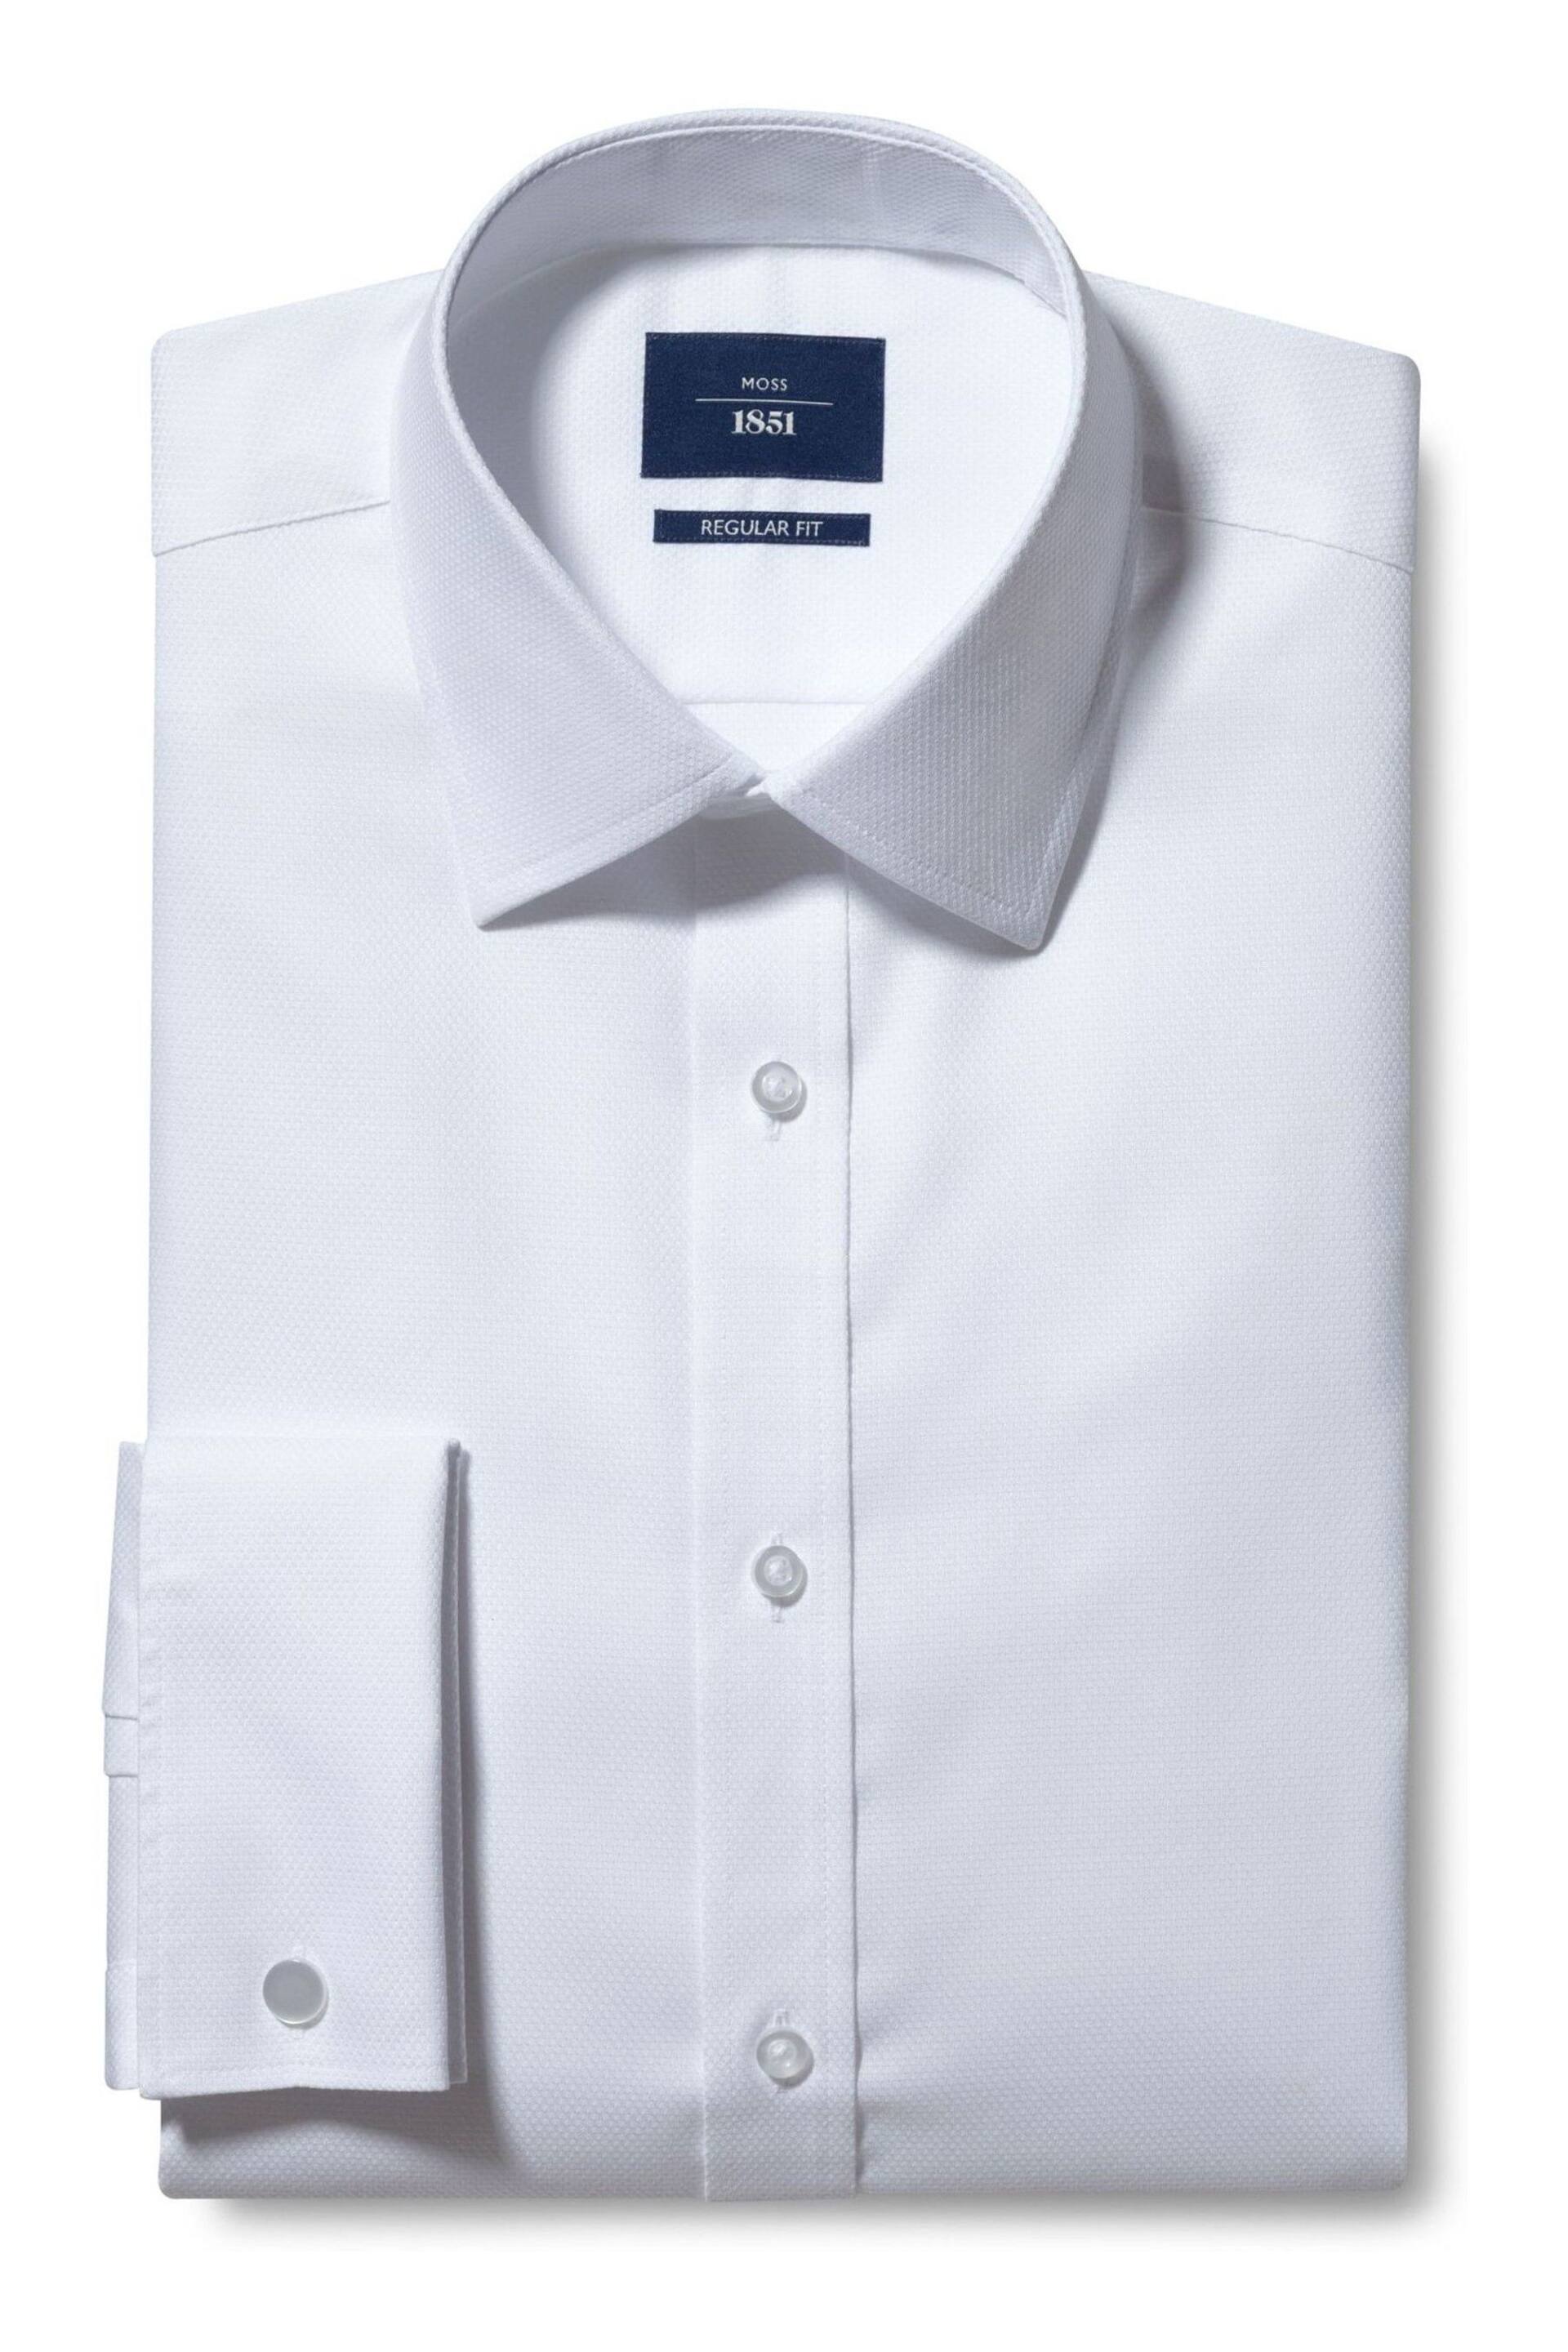 MOSS Regular Fit White Double Cuff Textured Shirt - Image 4 of 4